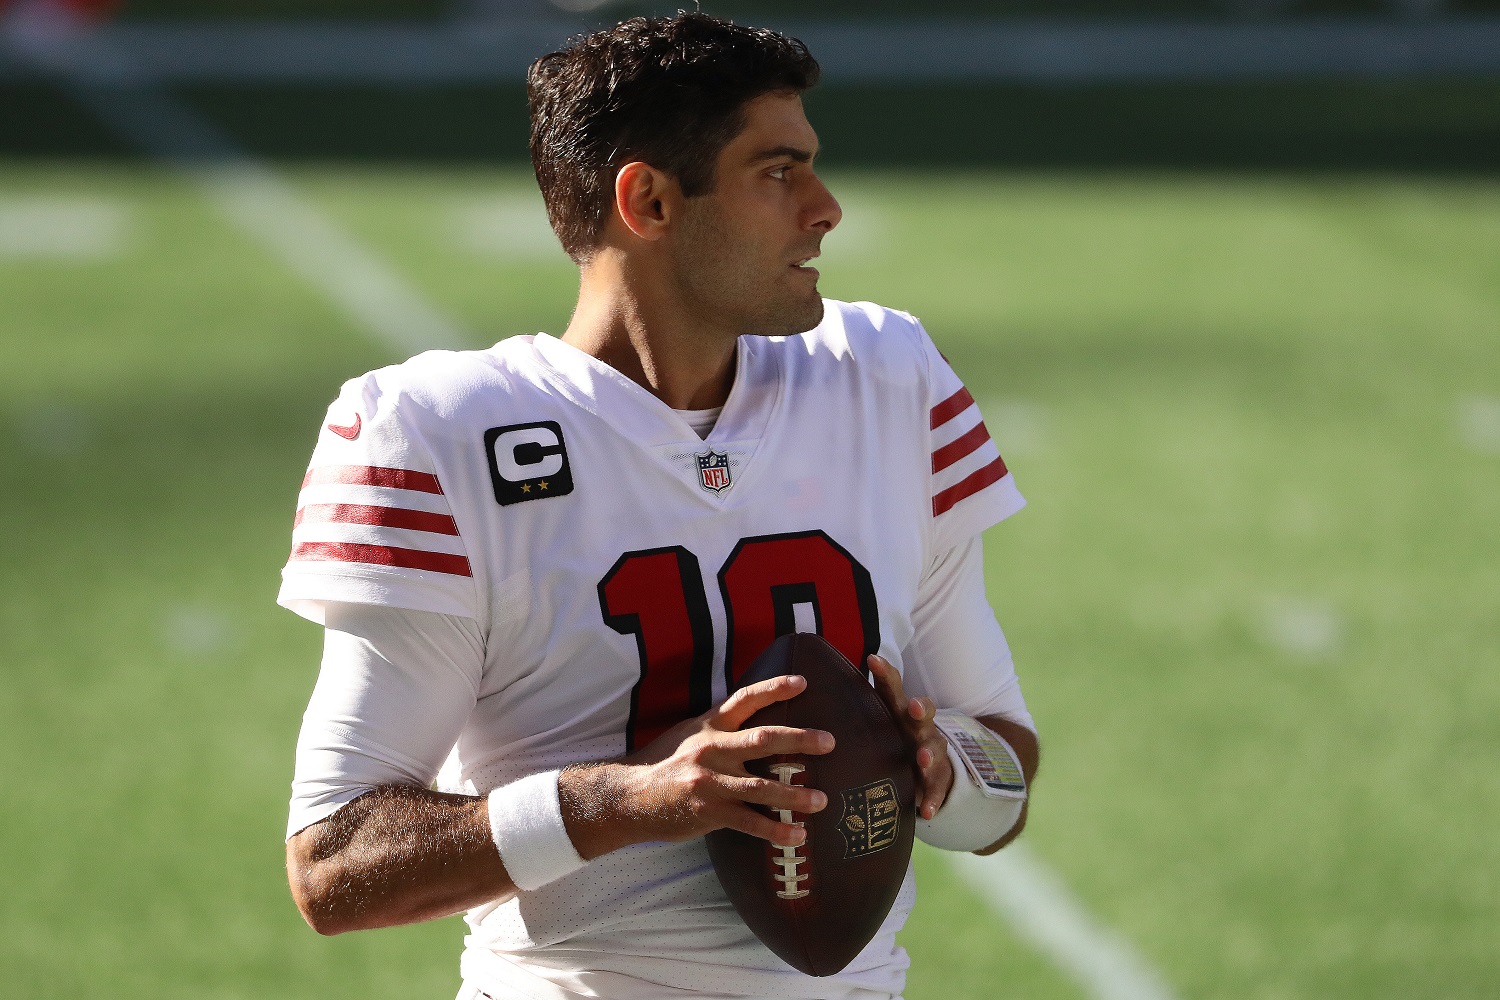 Jimmy Garoppolo hasn't panned out for the San Francisco 49ers, but the Miami Dolphins may have arranged for him to be traded to the New England Patriots.